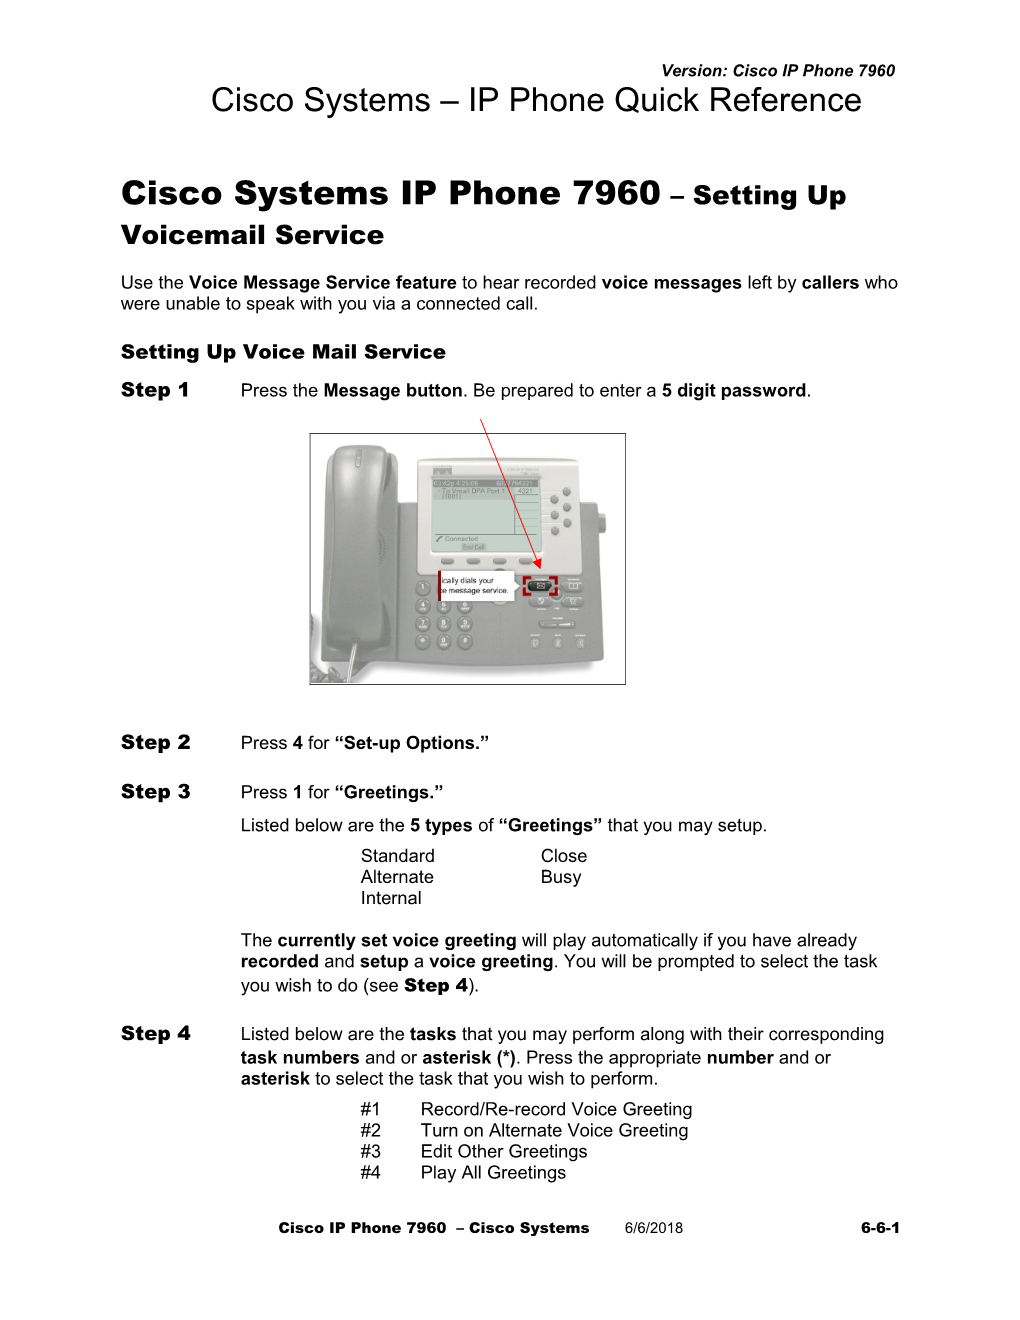 Cisco Systems IP Phone 7960 Setting up Voicemail Service